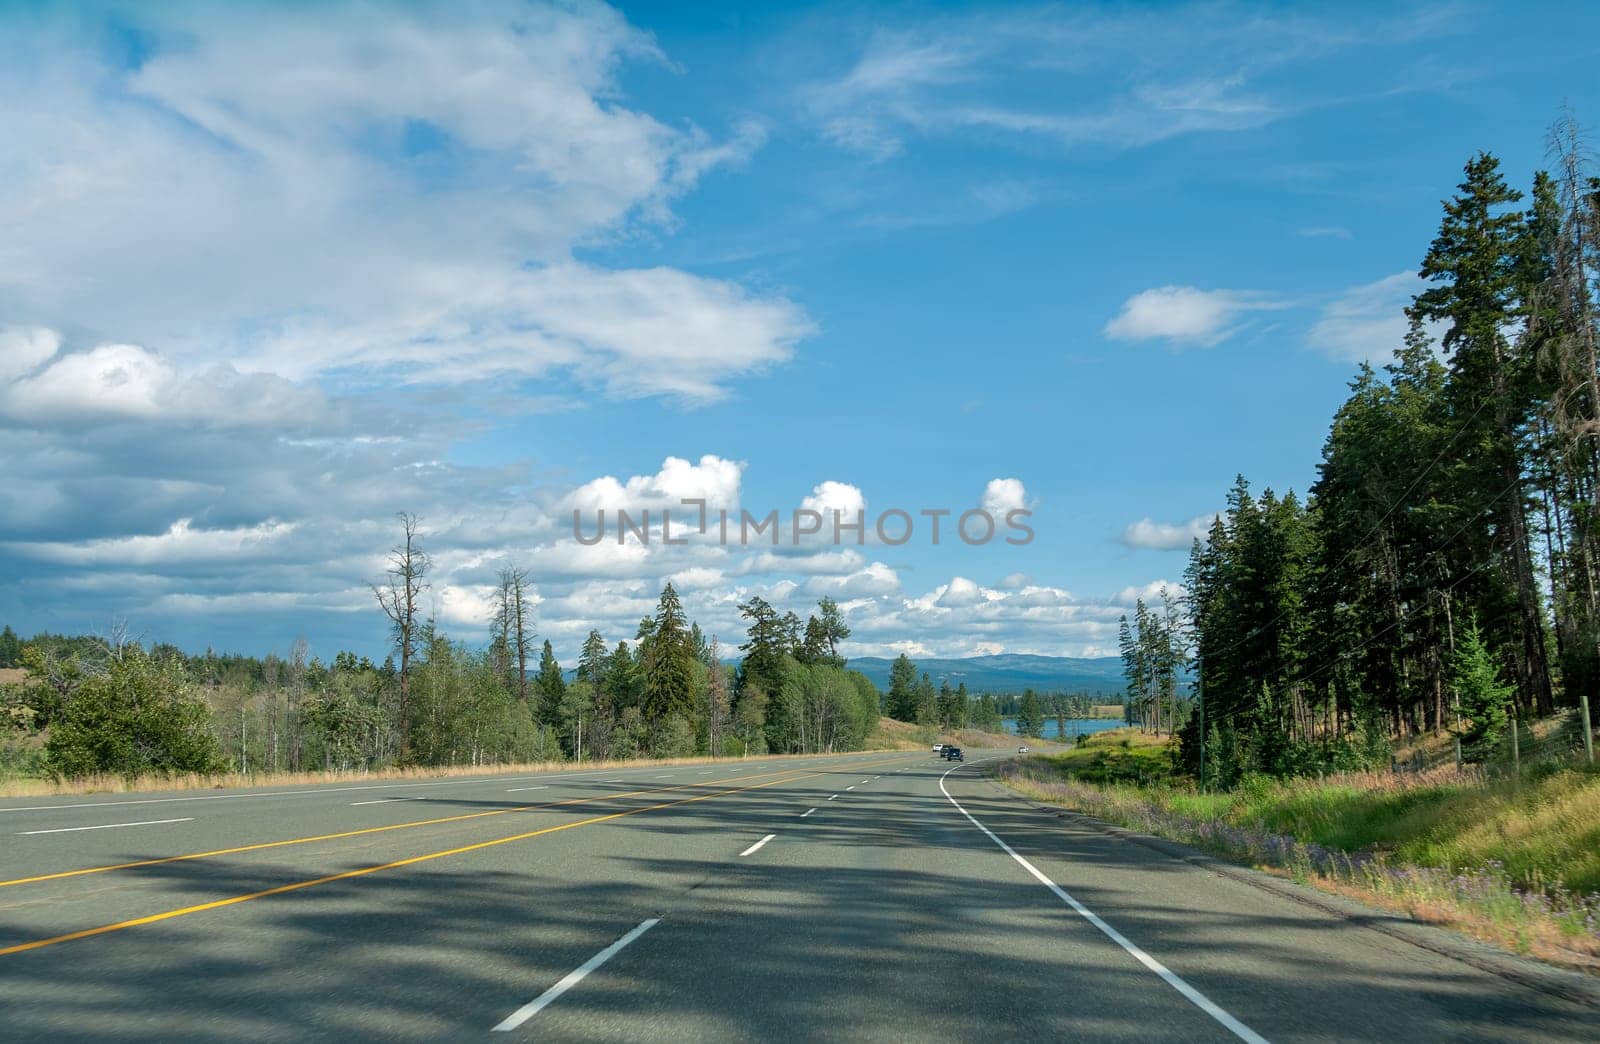 Turn of highway one in mountains of British Columbia by Imagenet